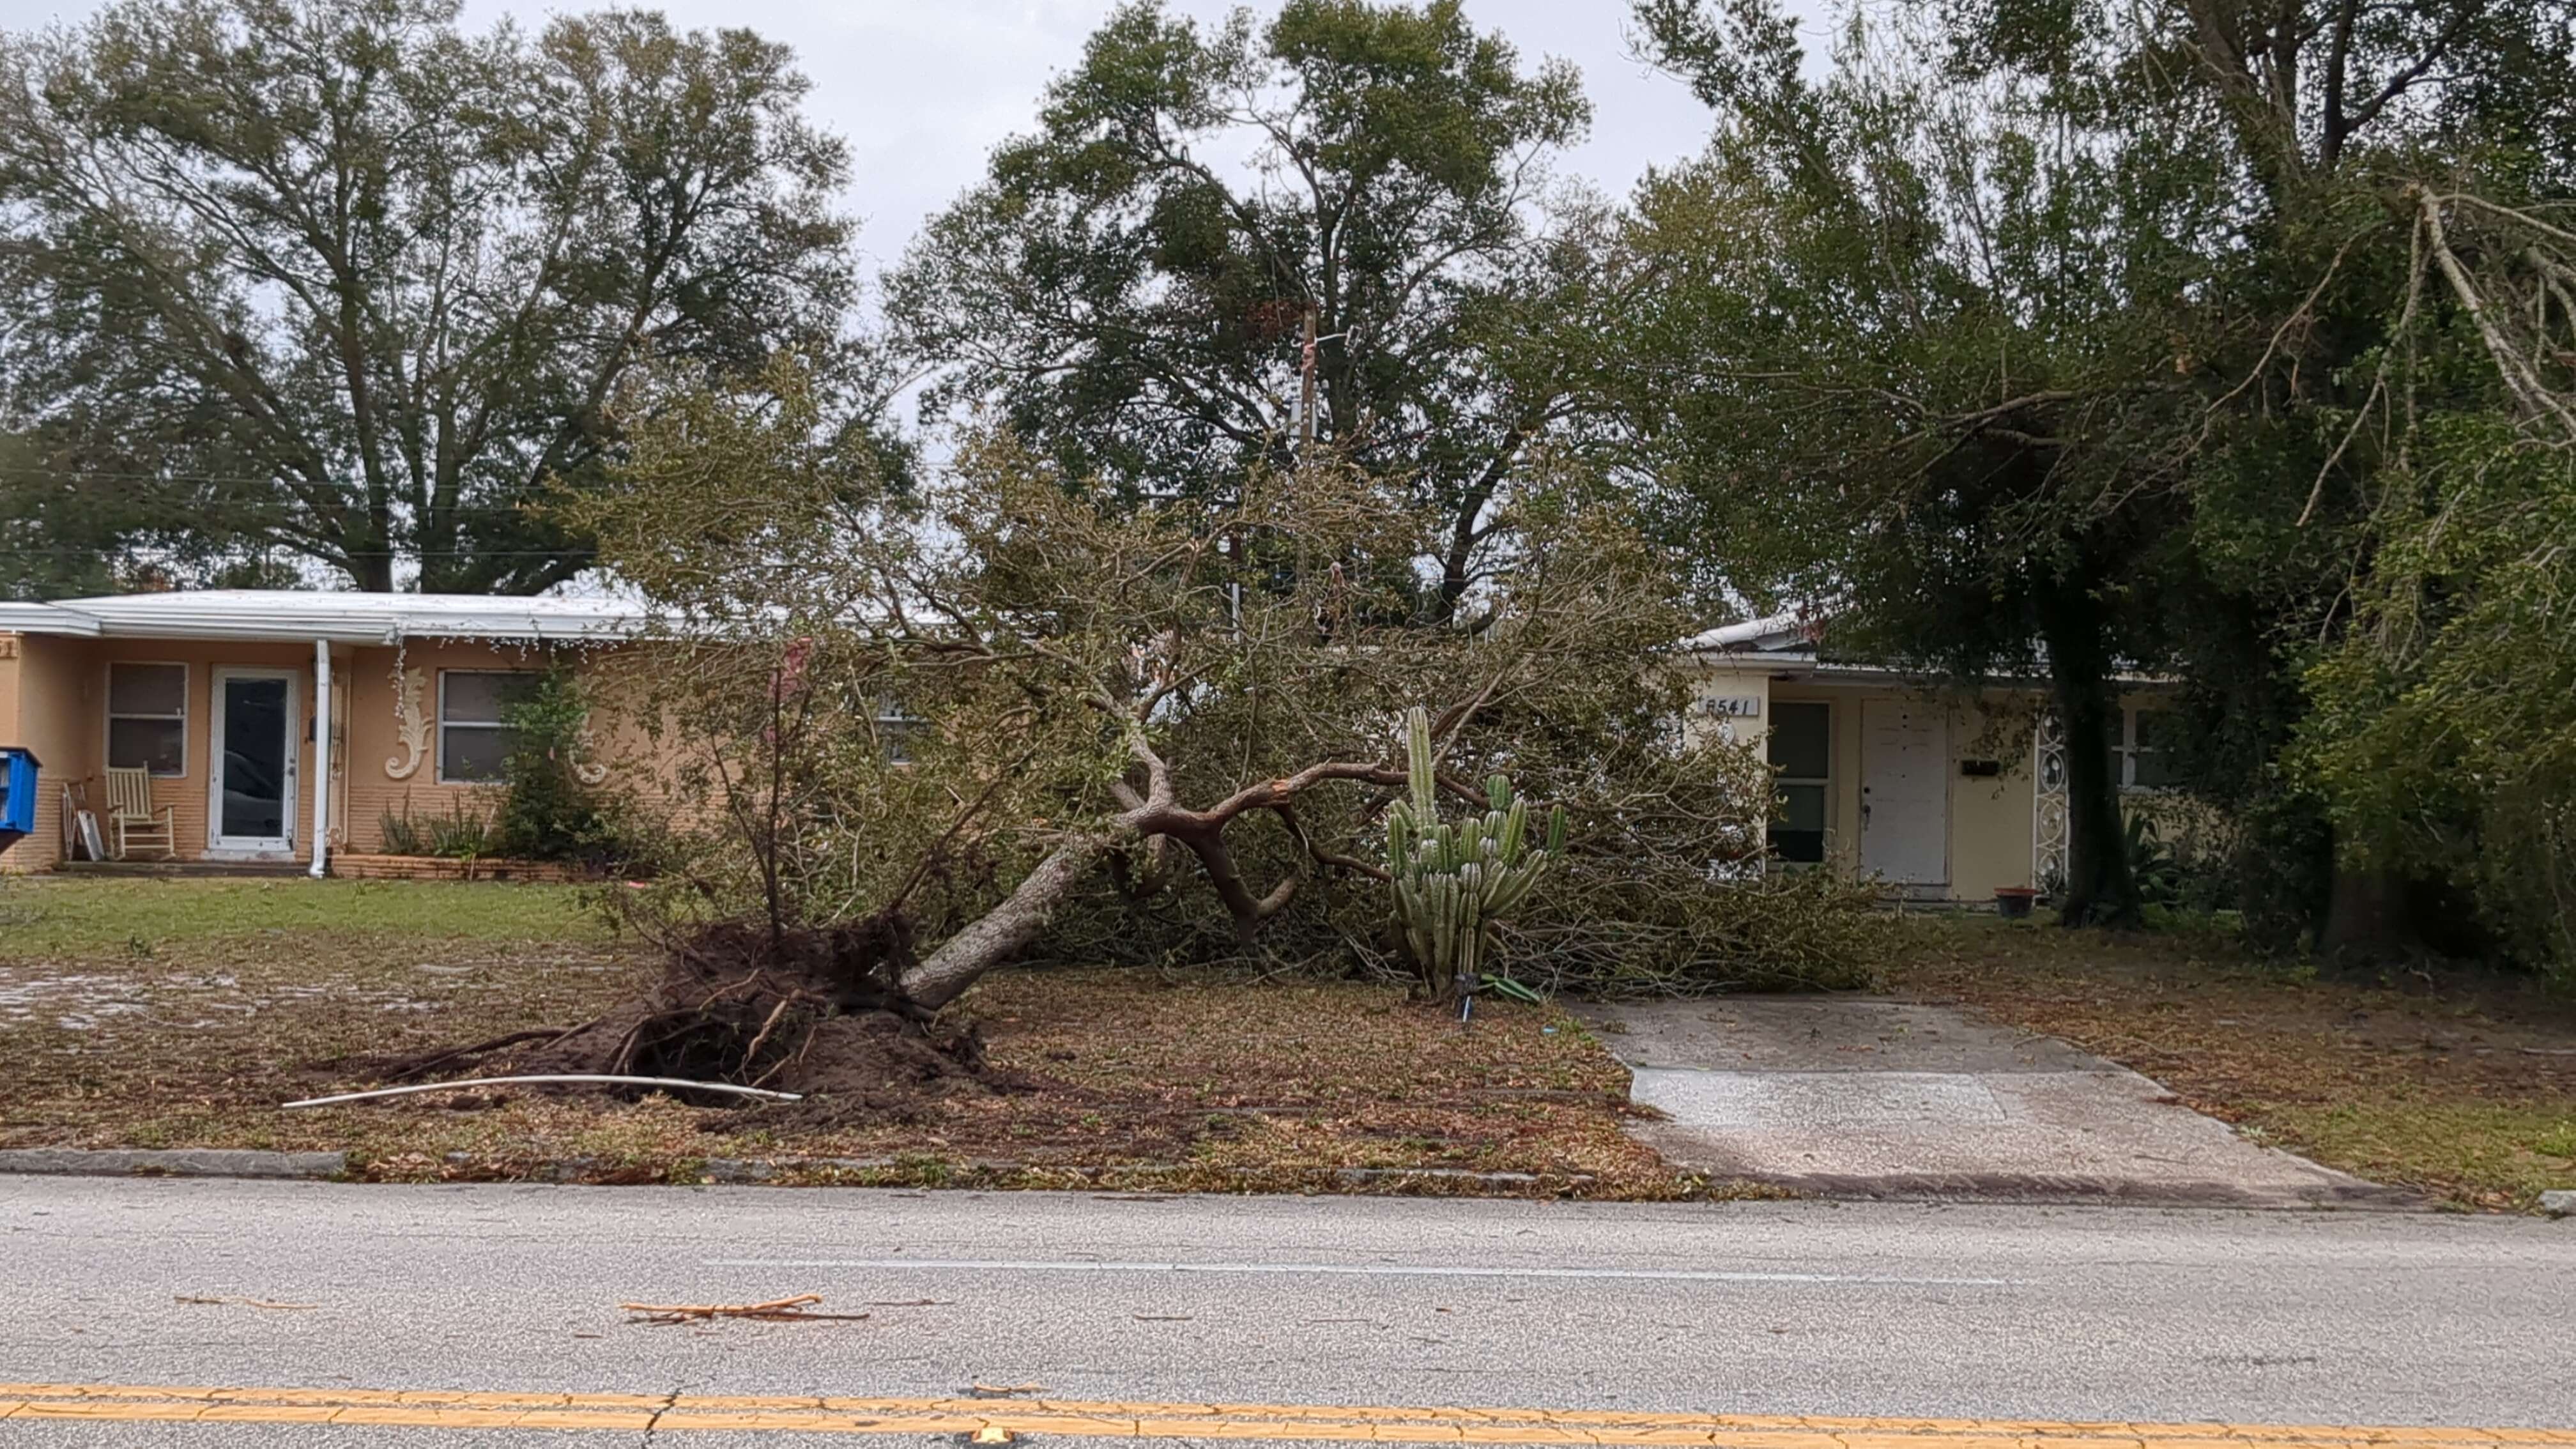 Picture of tree on house